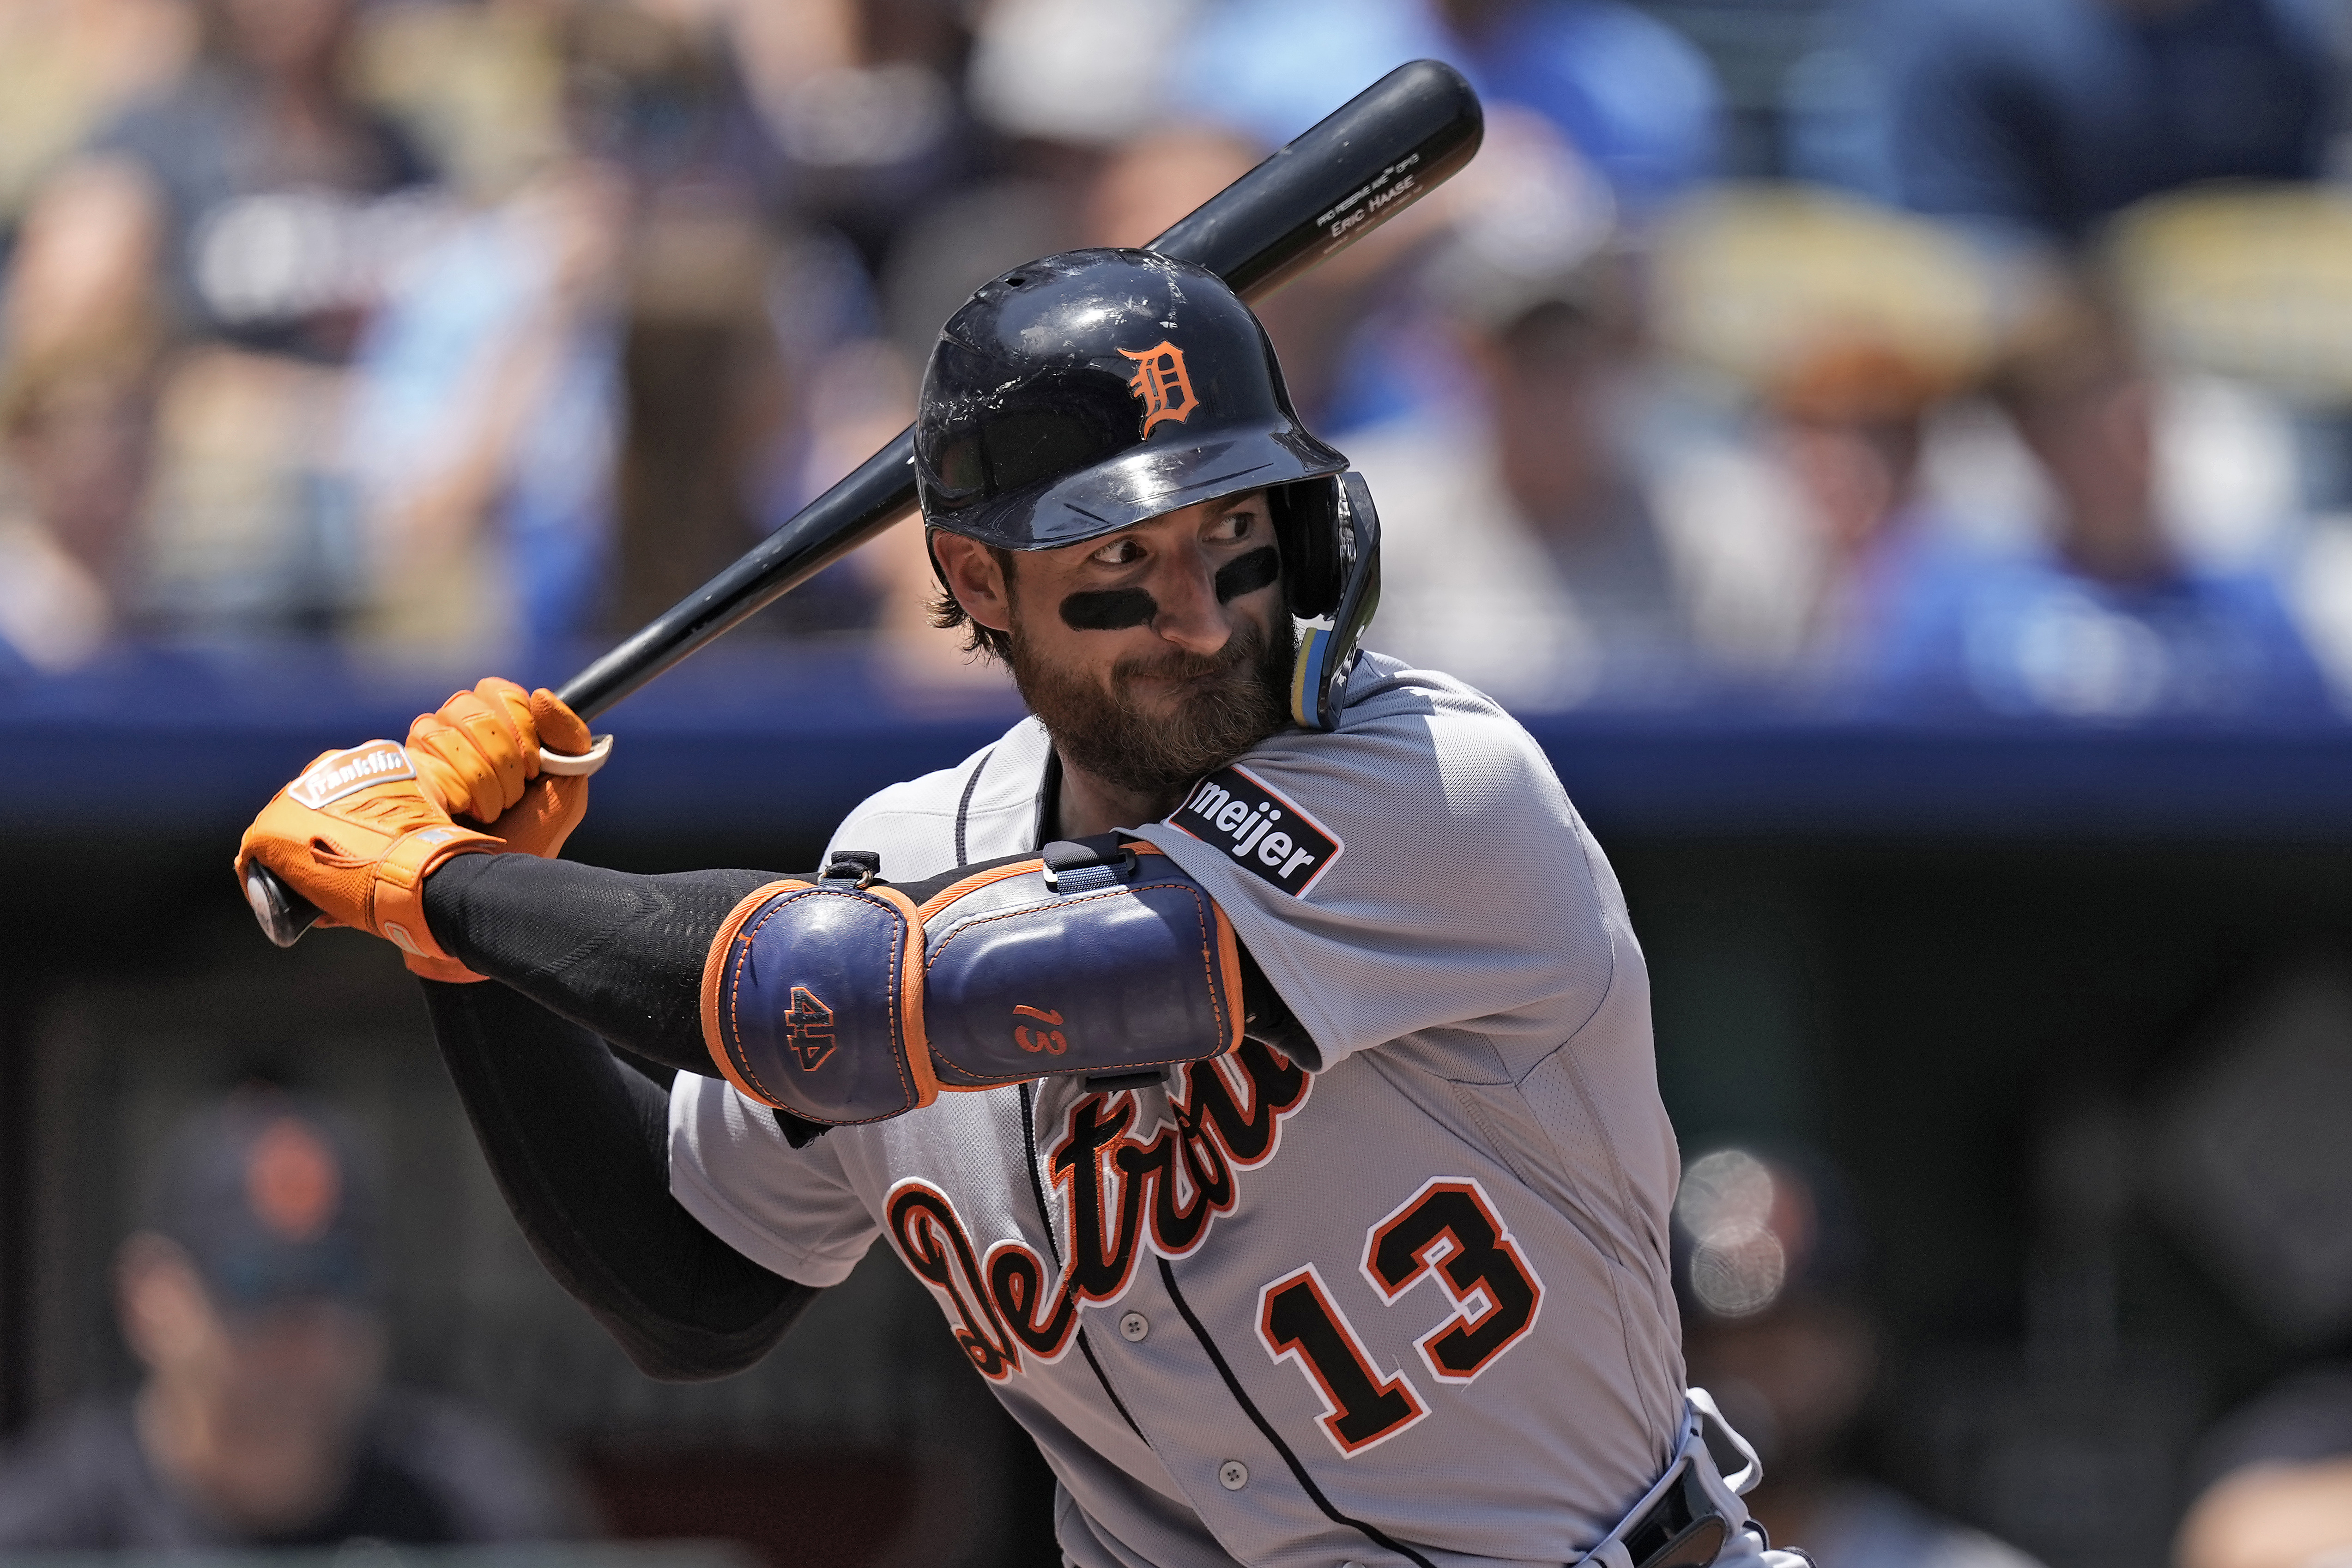 Tigers part ways with struggling catcher, Westland native Eric Hasse